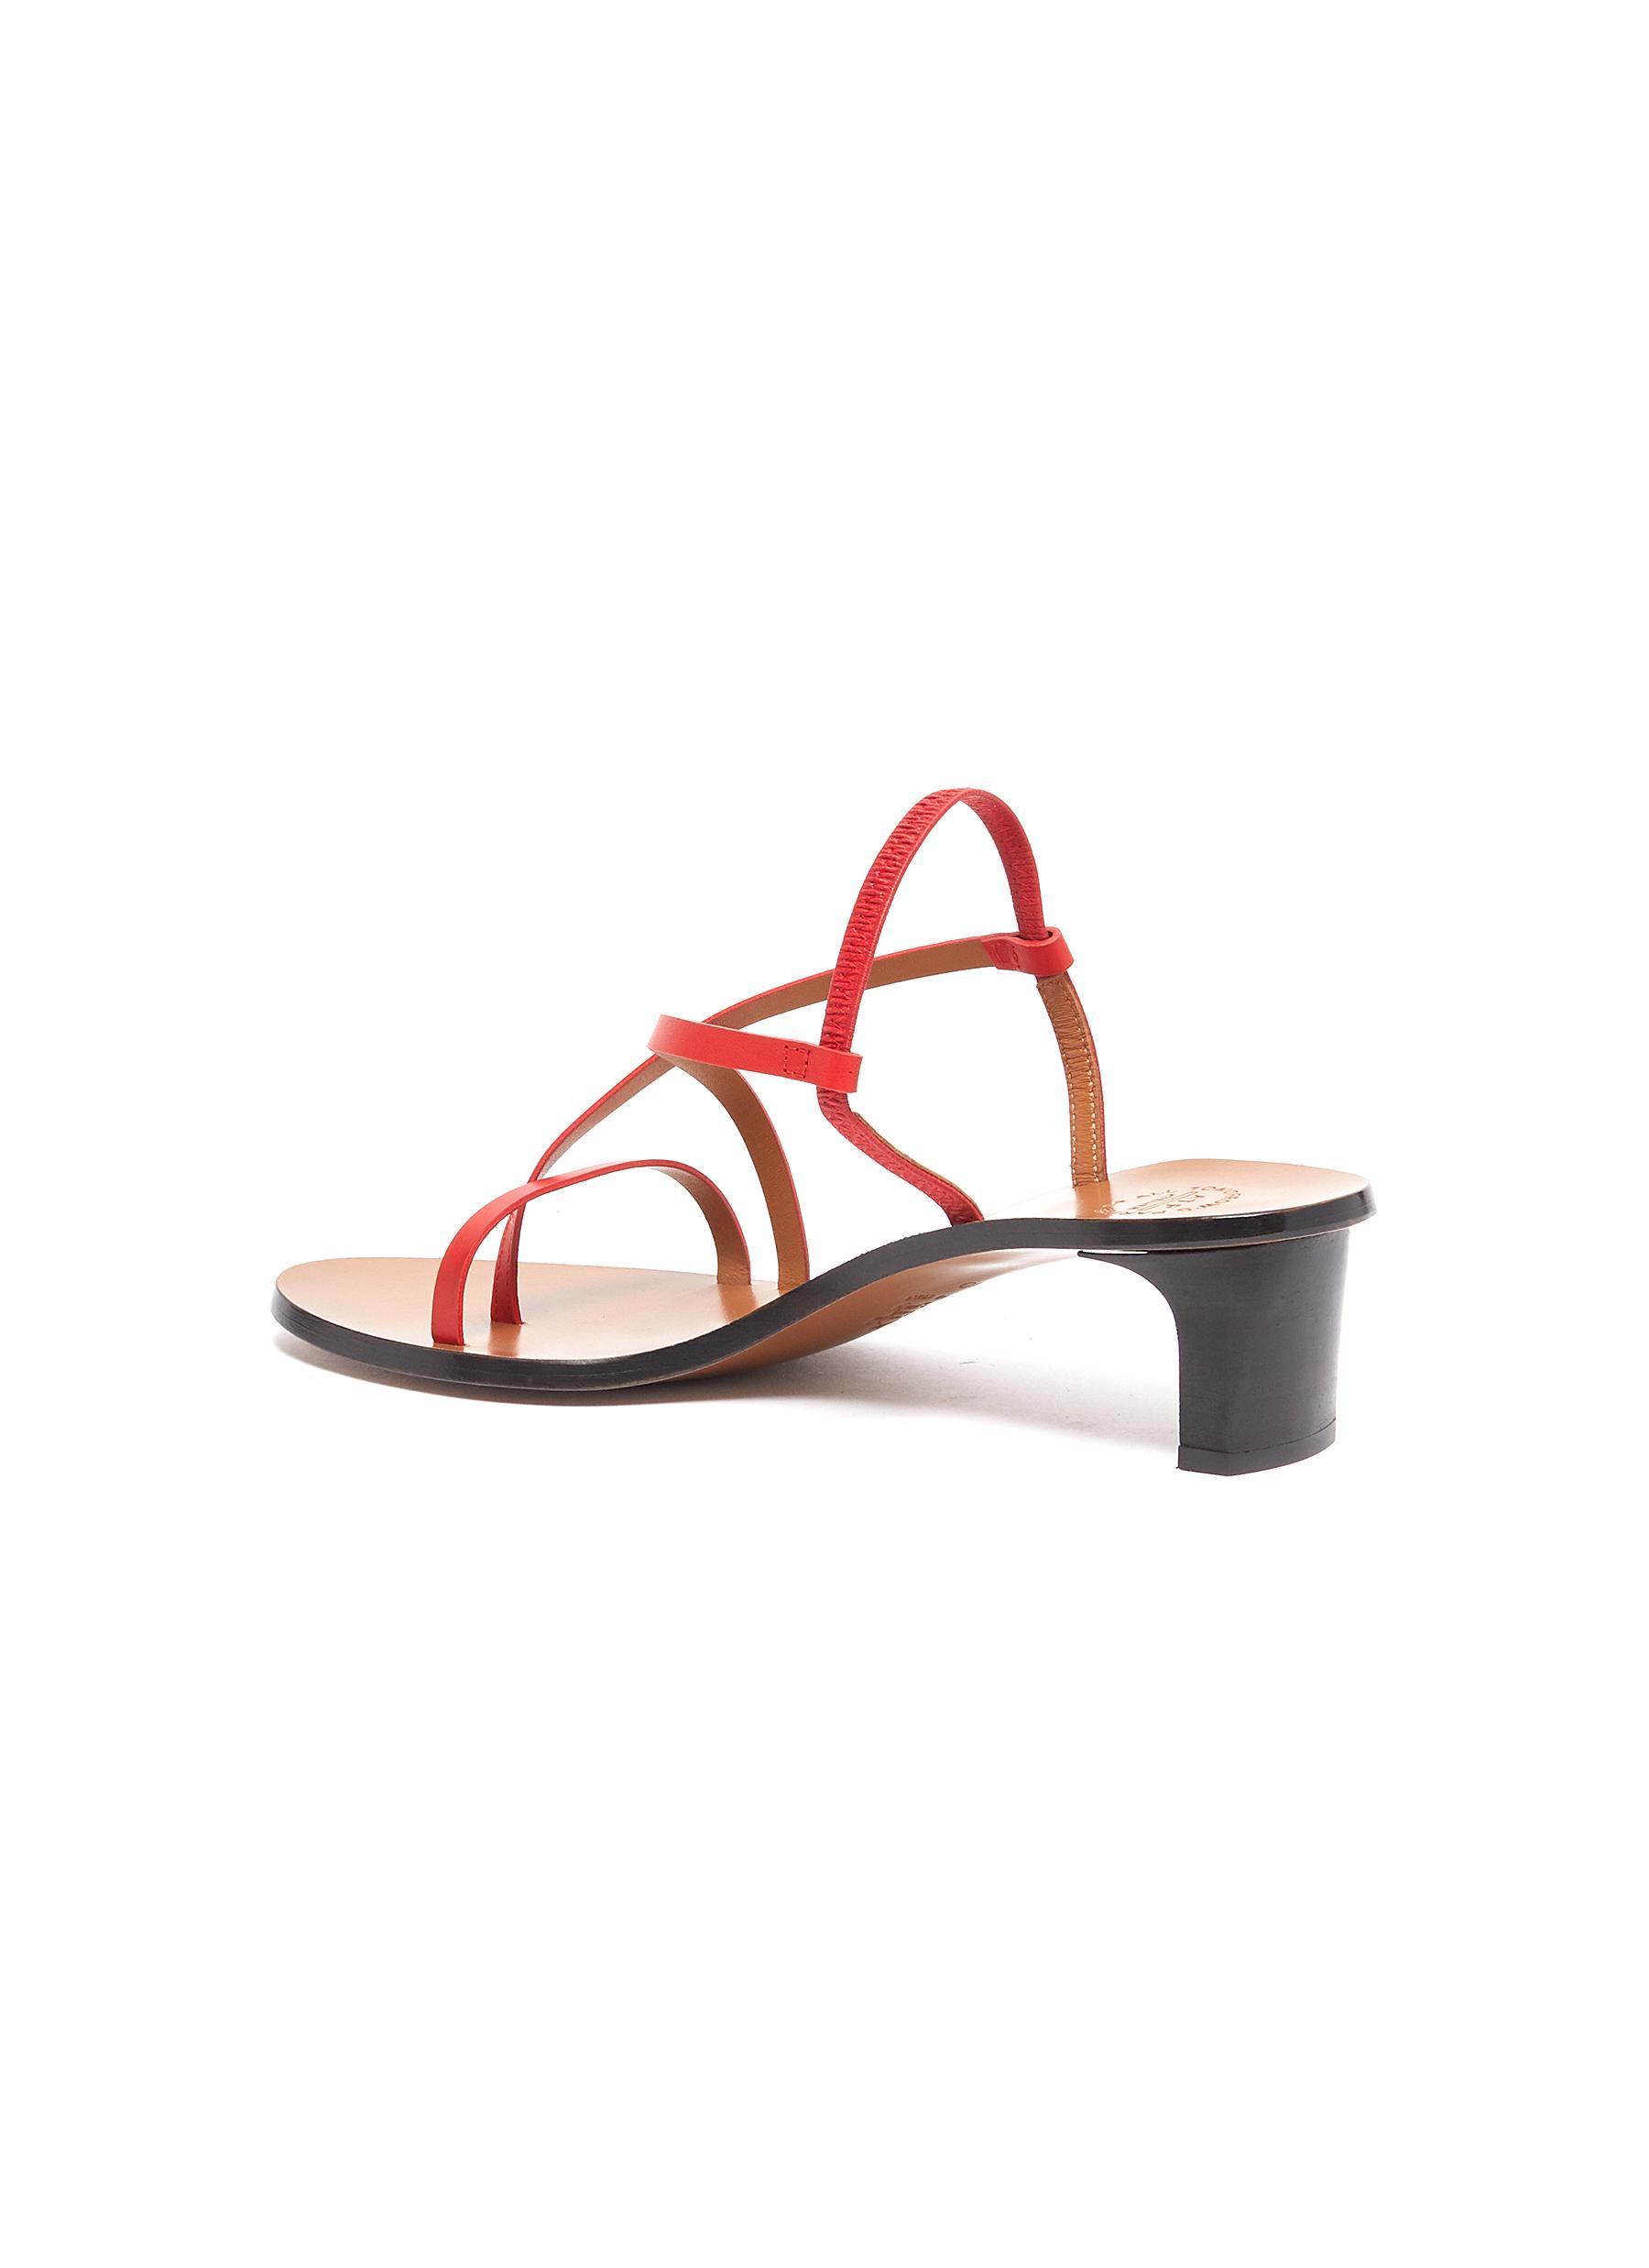 Atp Atelier 'nashi' Strappy Leather Sandals in Red - Lyst